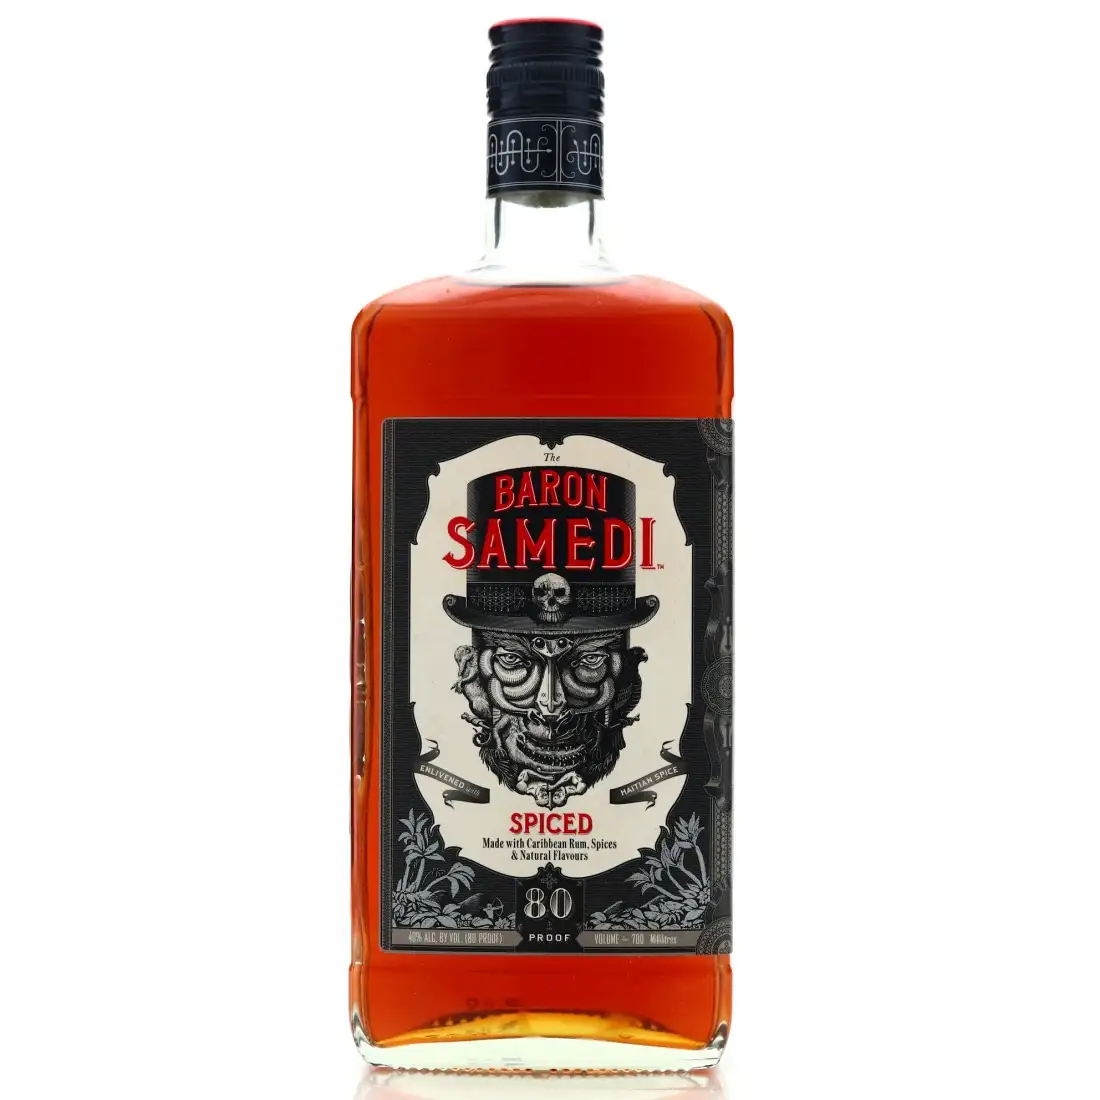 Image of the front of the bottle of the rum Baron Samedi Spiced